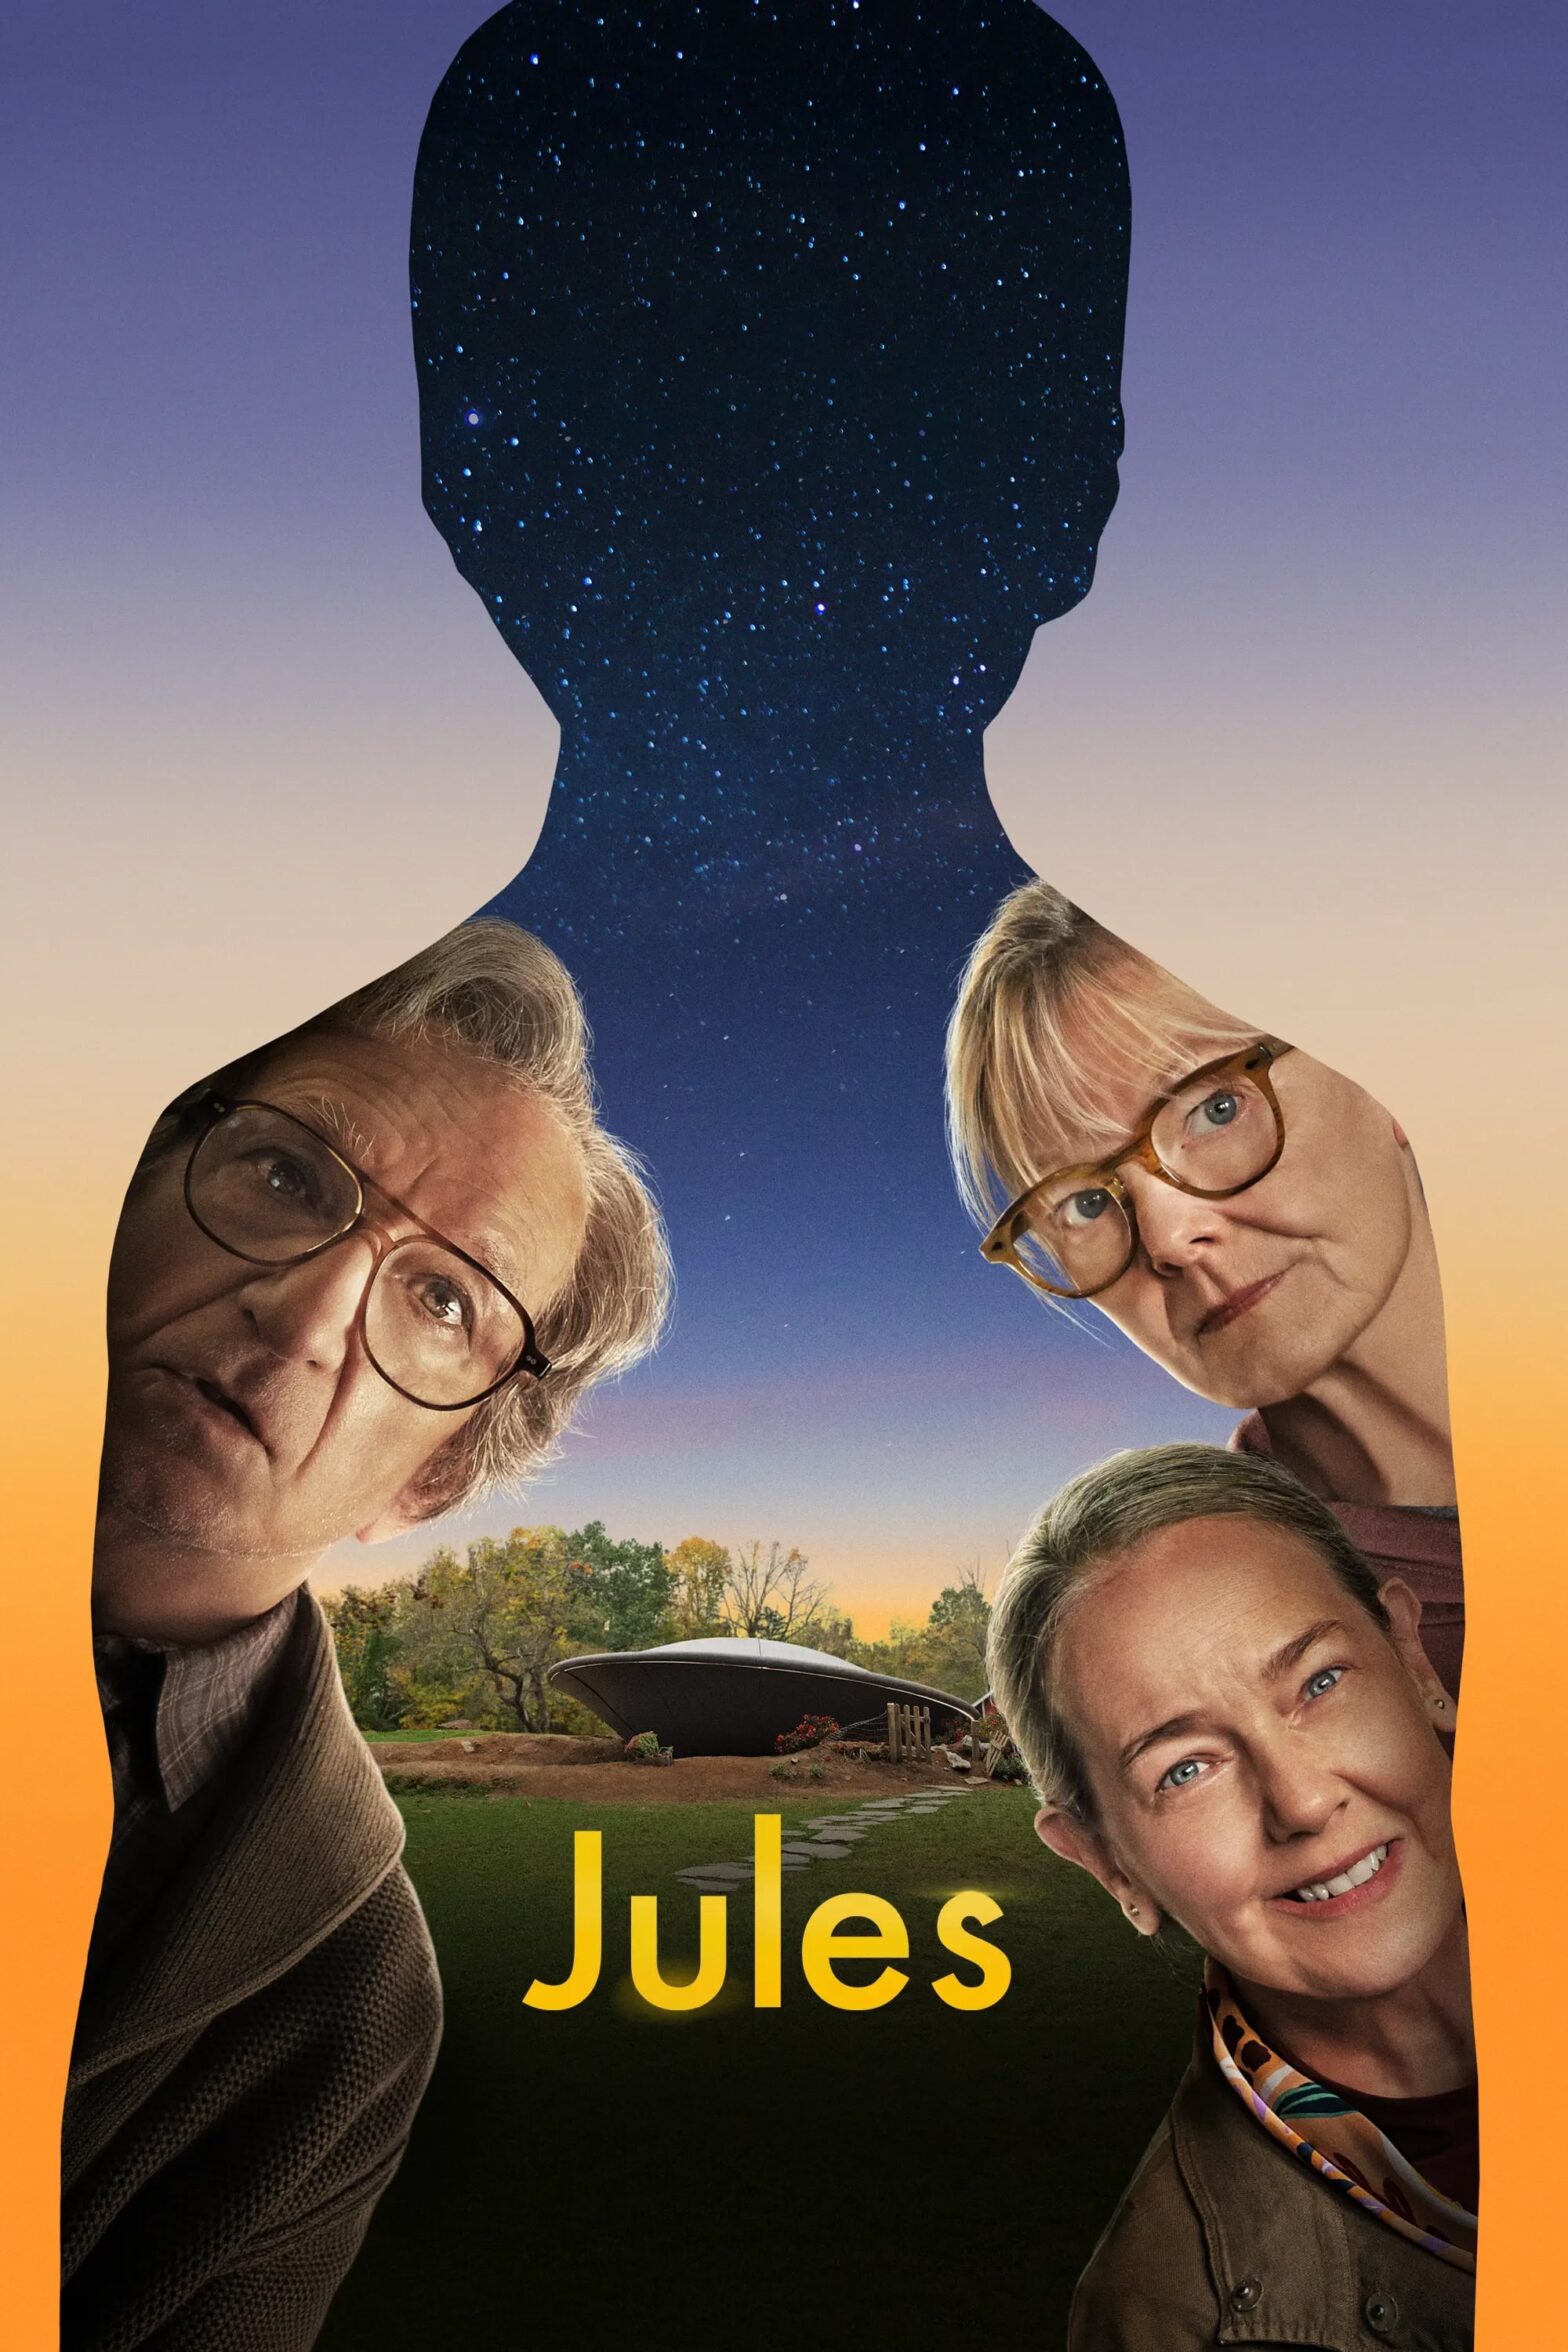 Poster for the movie "Jules"